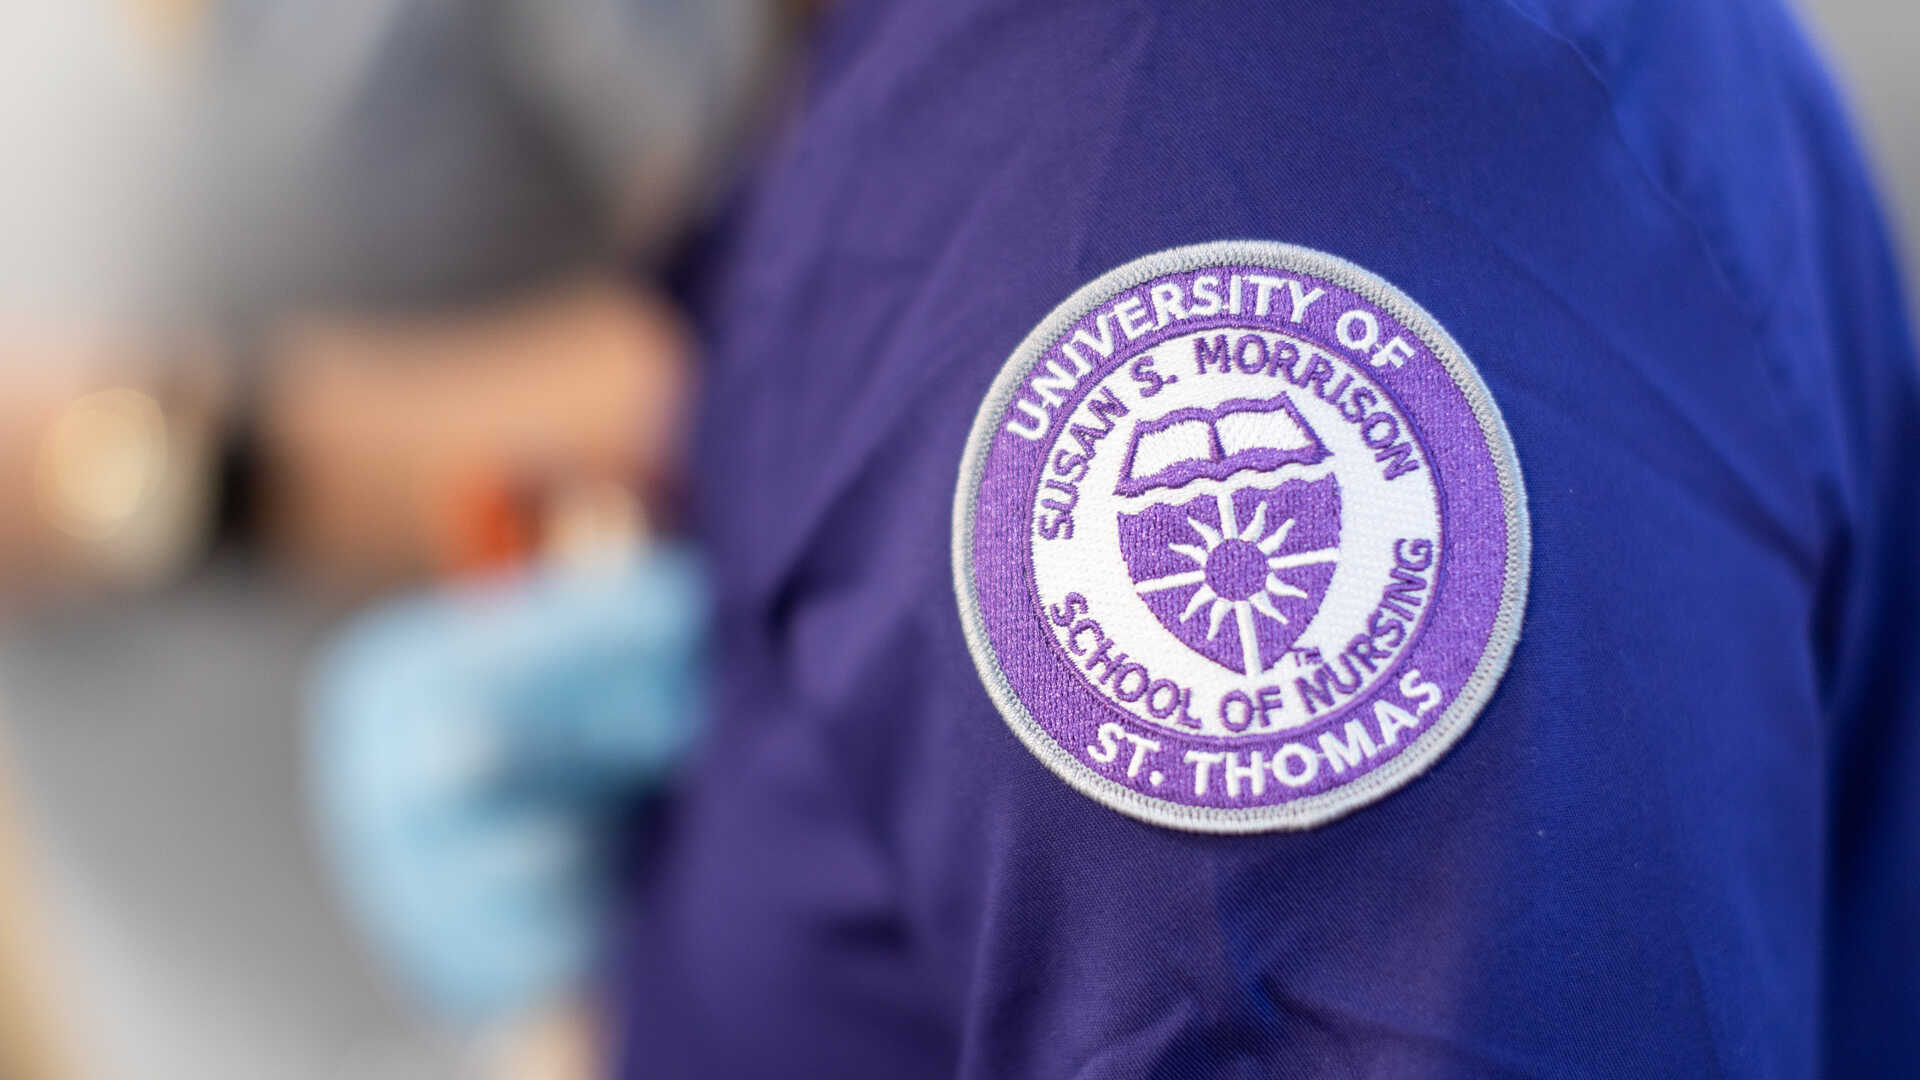 A person wearing scrubs with the School of Nursing badge